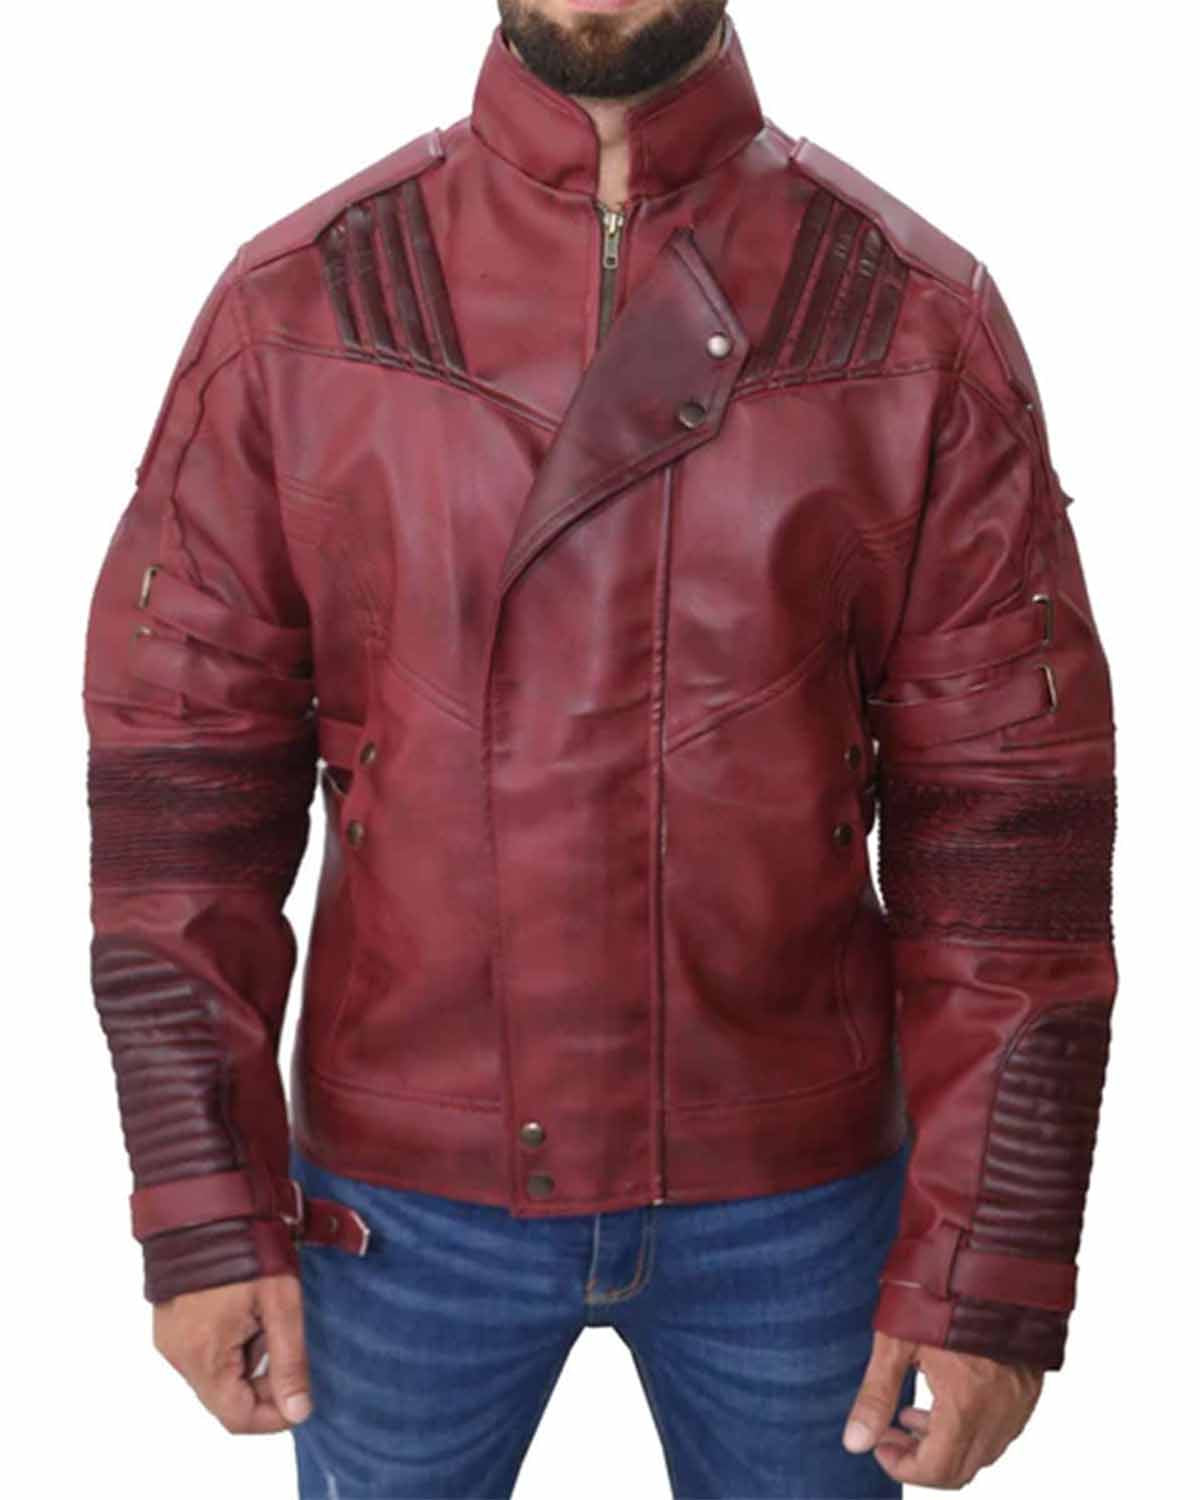 Elite Guardians Of The Galaxy Game Star Lord Jacket